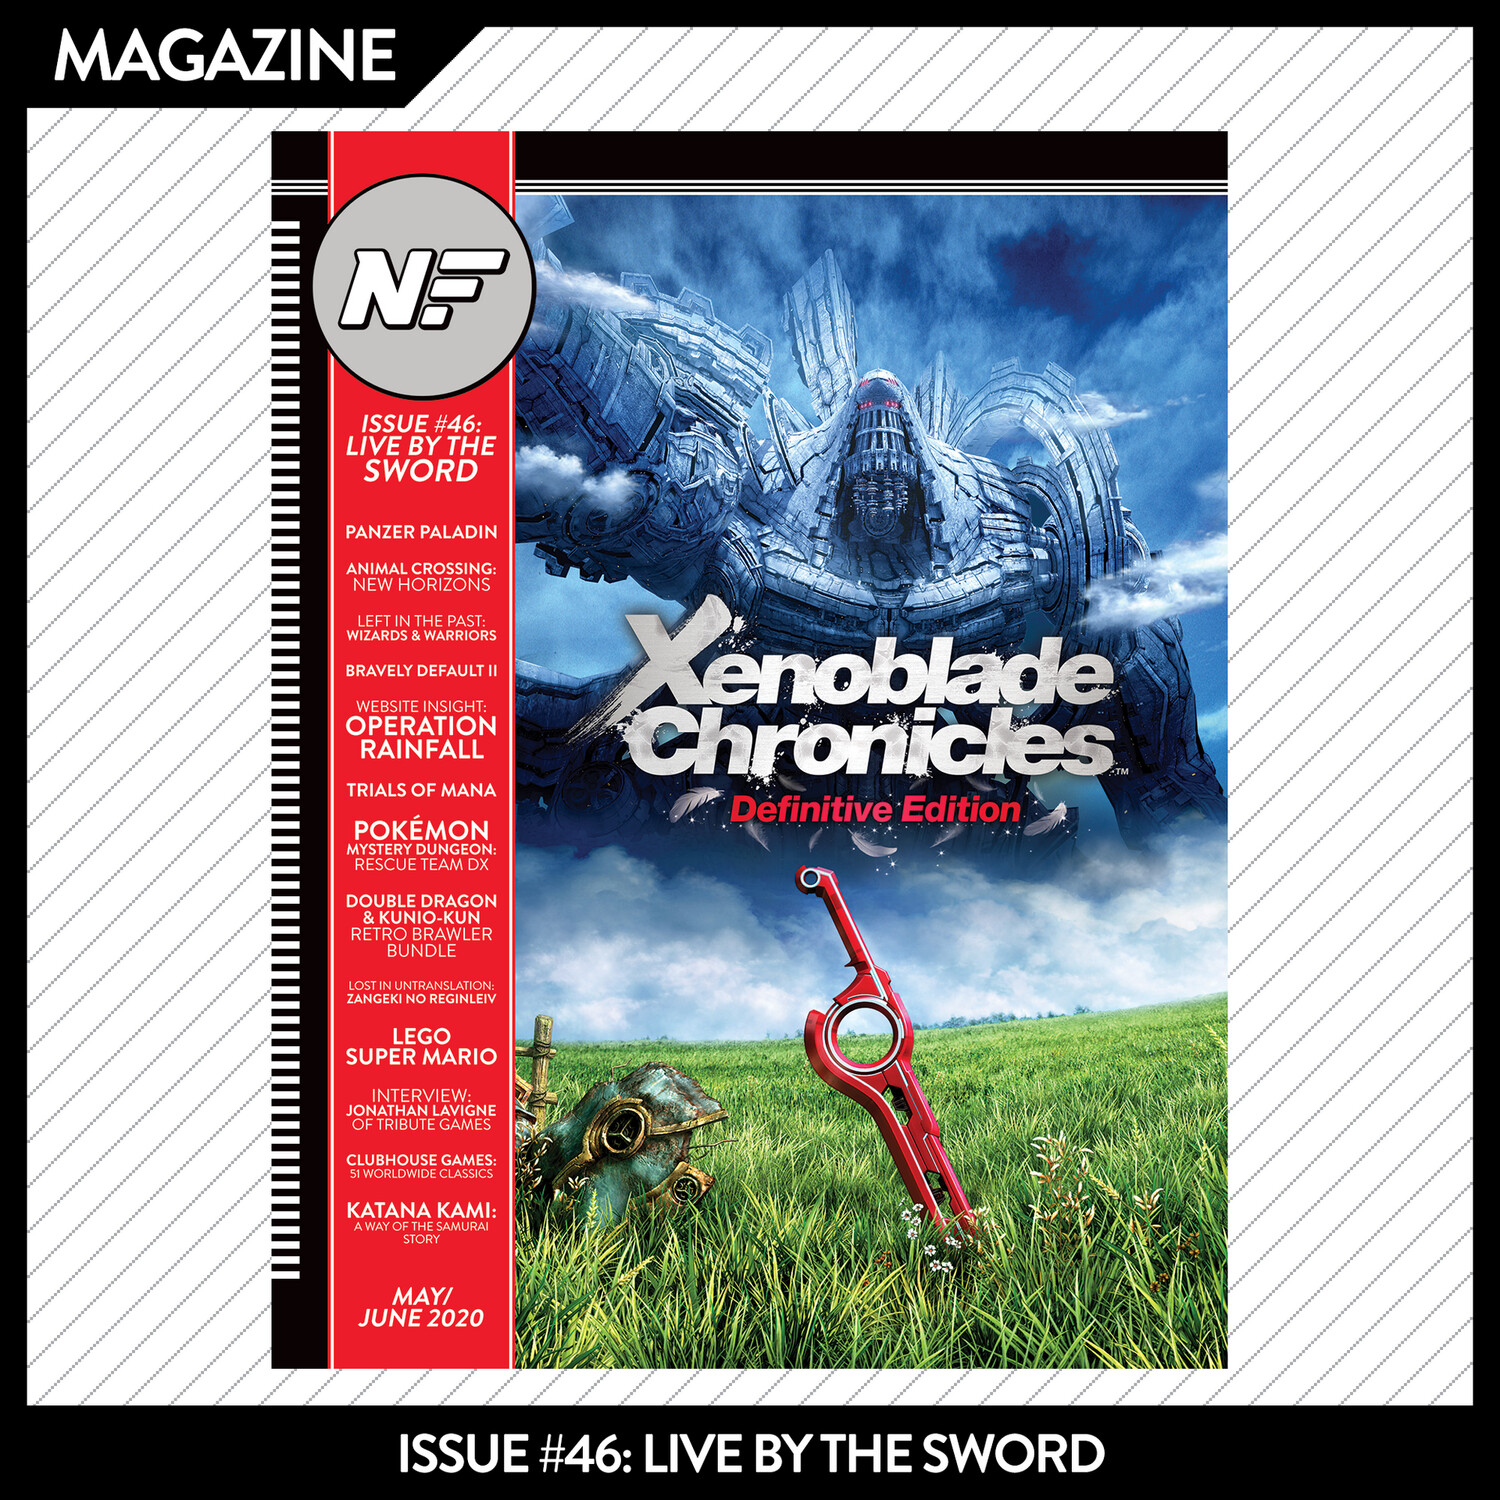 Issue #46: Live by the Sword – May/June 2020